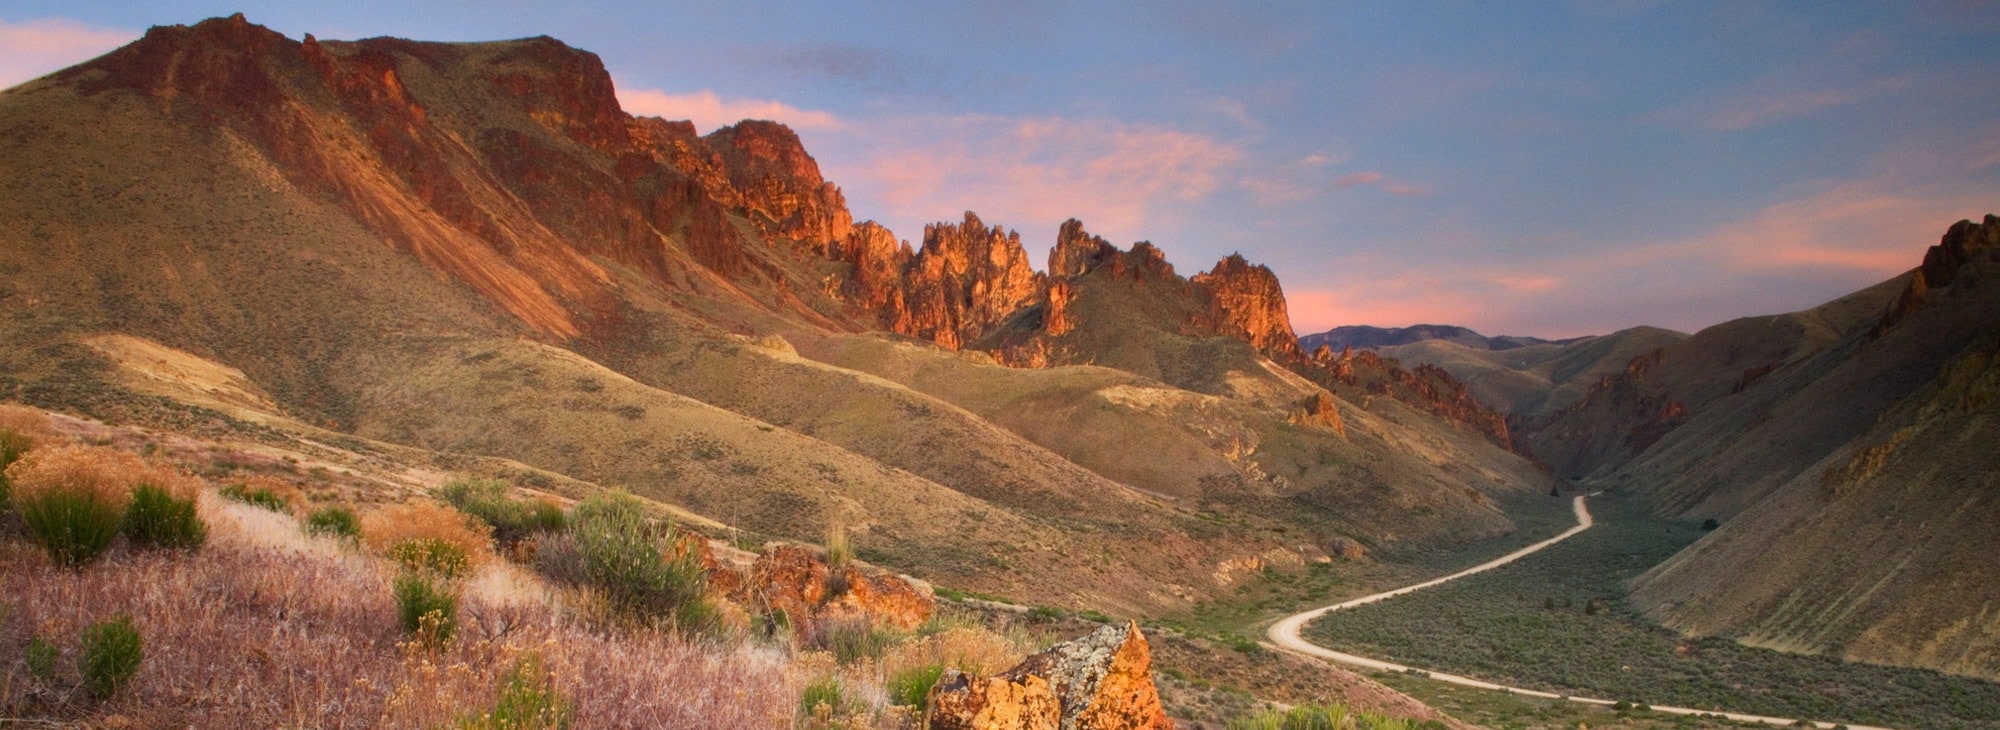 A Hiker’s Guide to the Owyhee Canyonlands - Travel Oregon